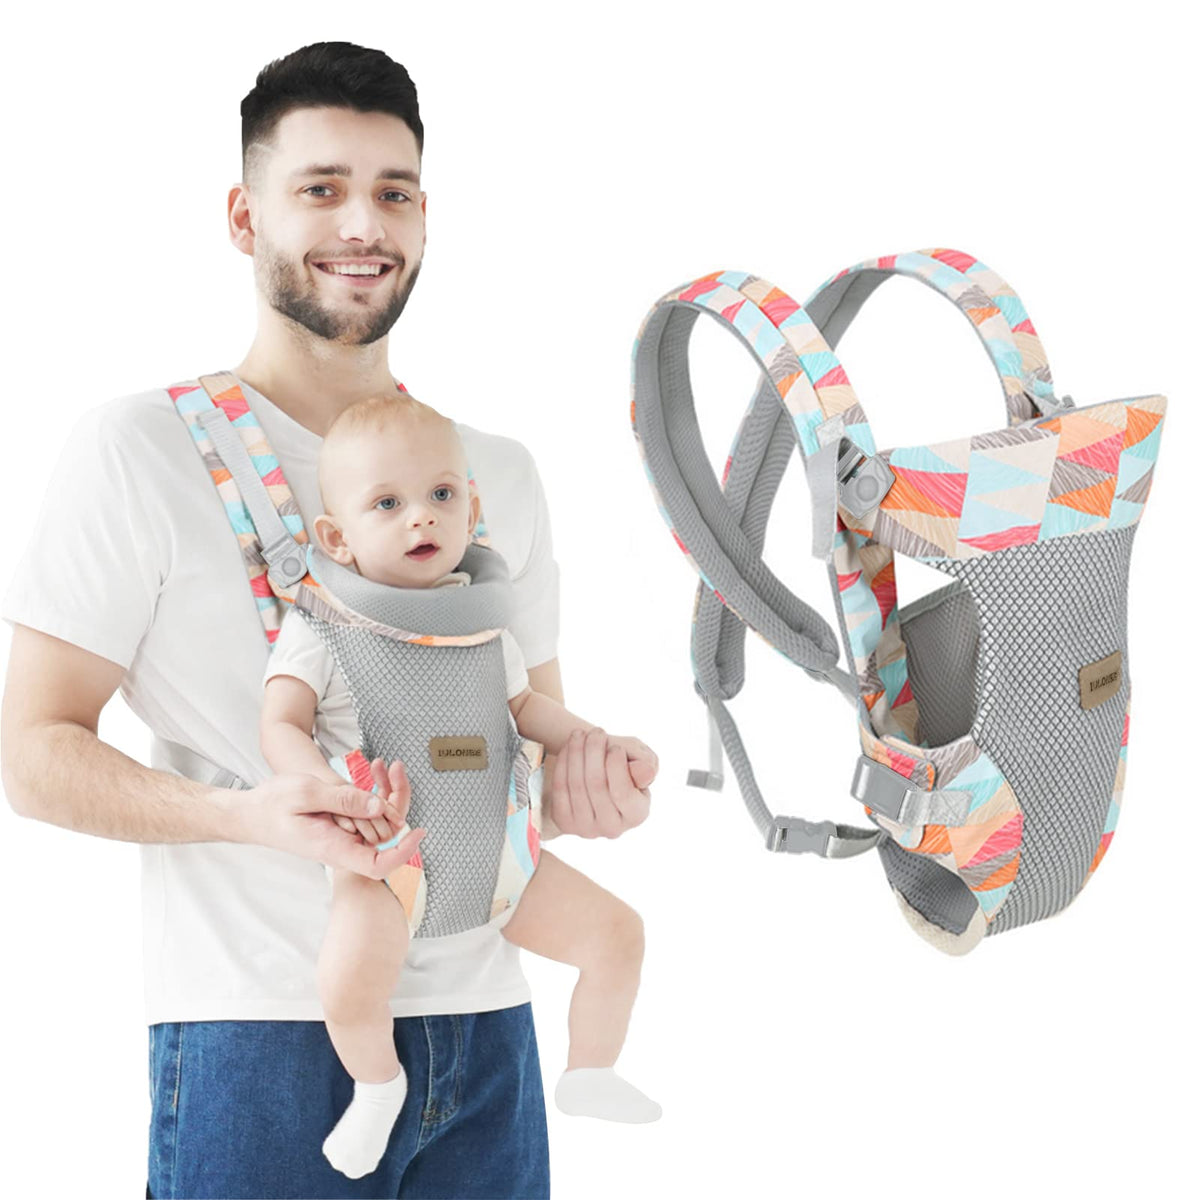 IULONEE Baby Carrier Wrap Hands Free Ergonomic Portable 4 in 1 Newborn Carrier Slings Soft Toddler Back Carrier for Infant 3-36Months Colorful